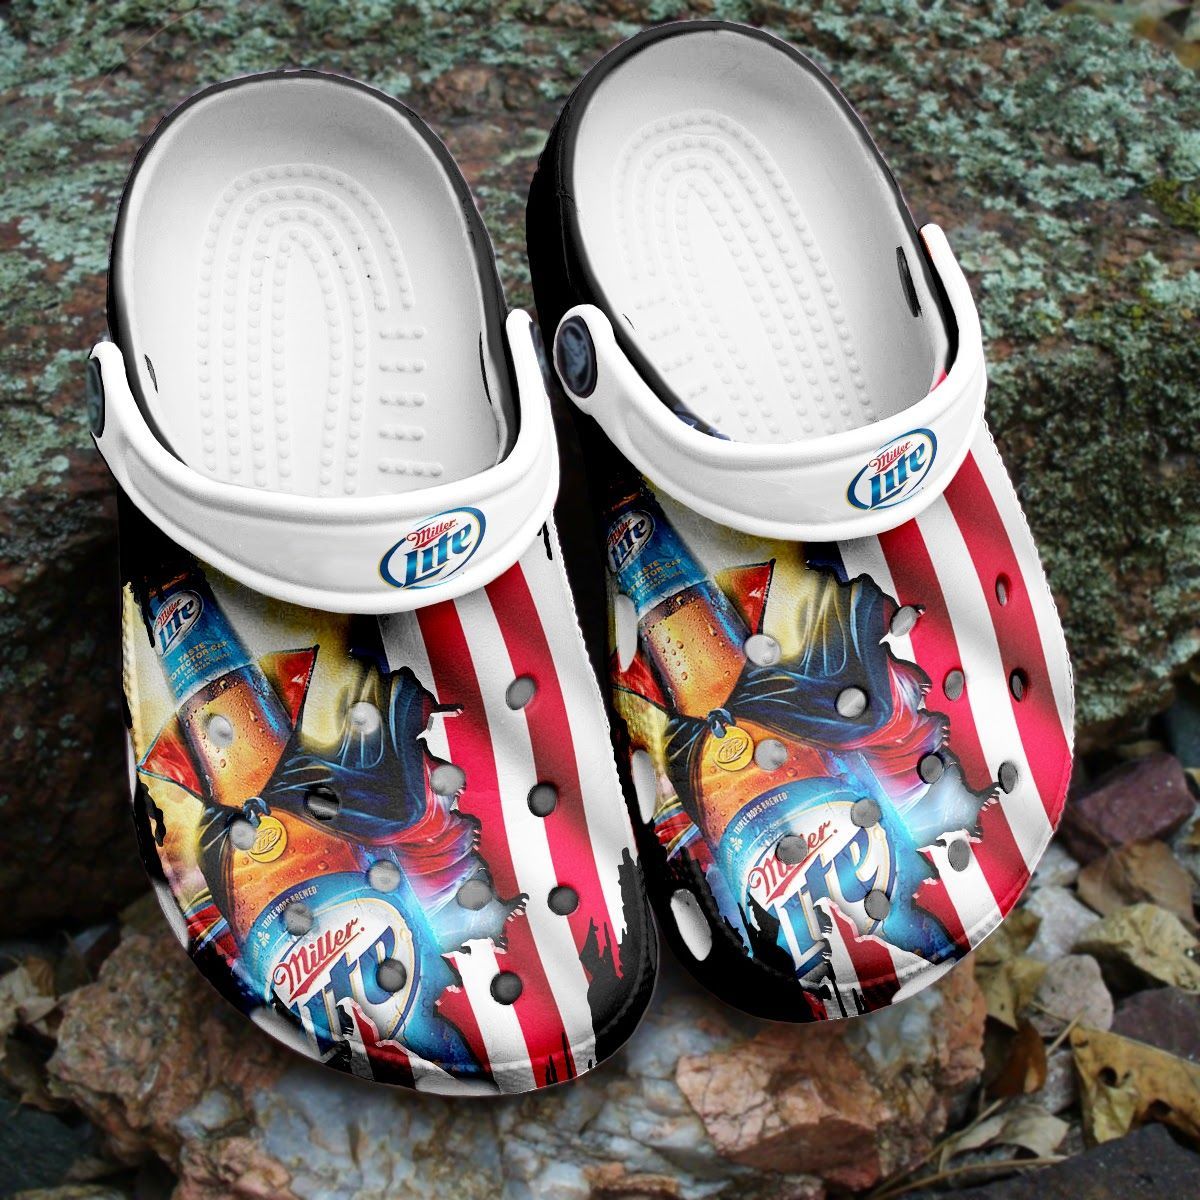 If you'd like to purchase a pair of Crocband Clogs, be sure to check out the official website. 144